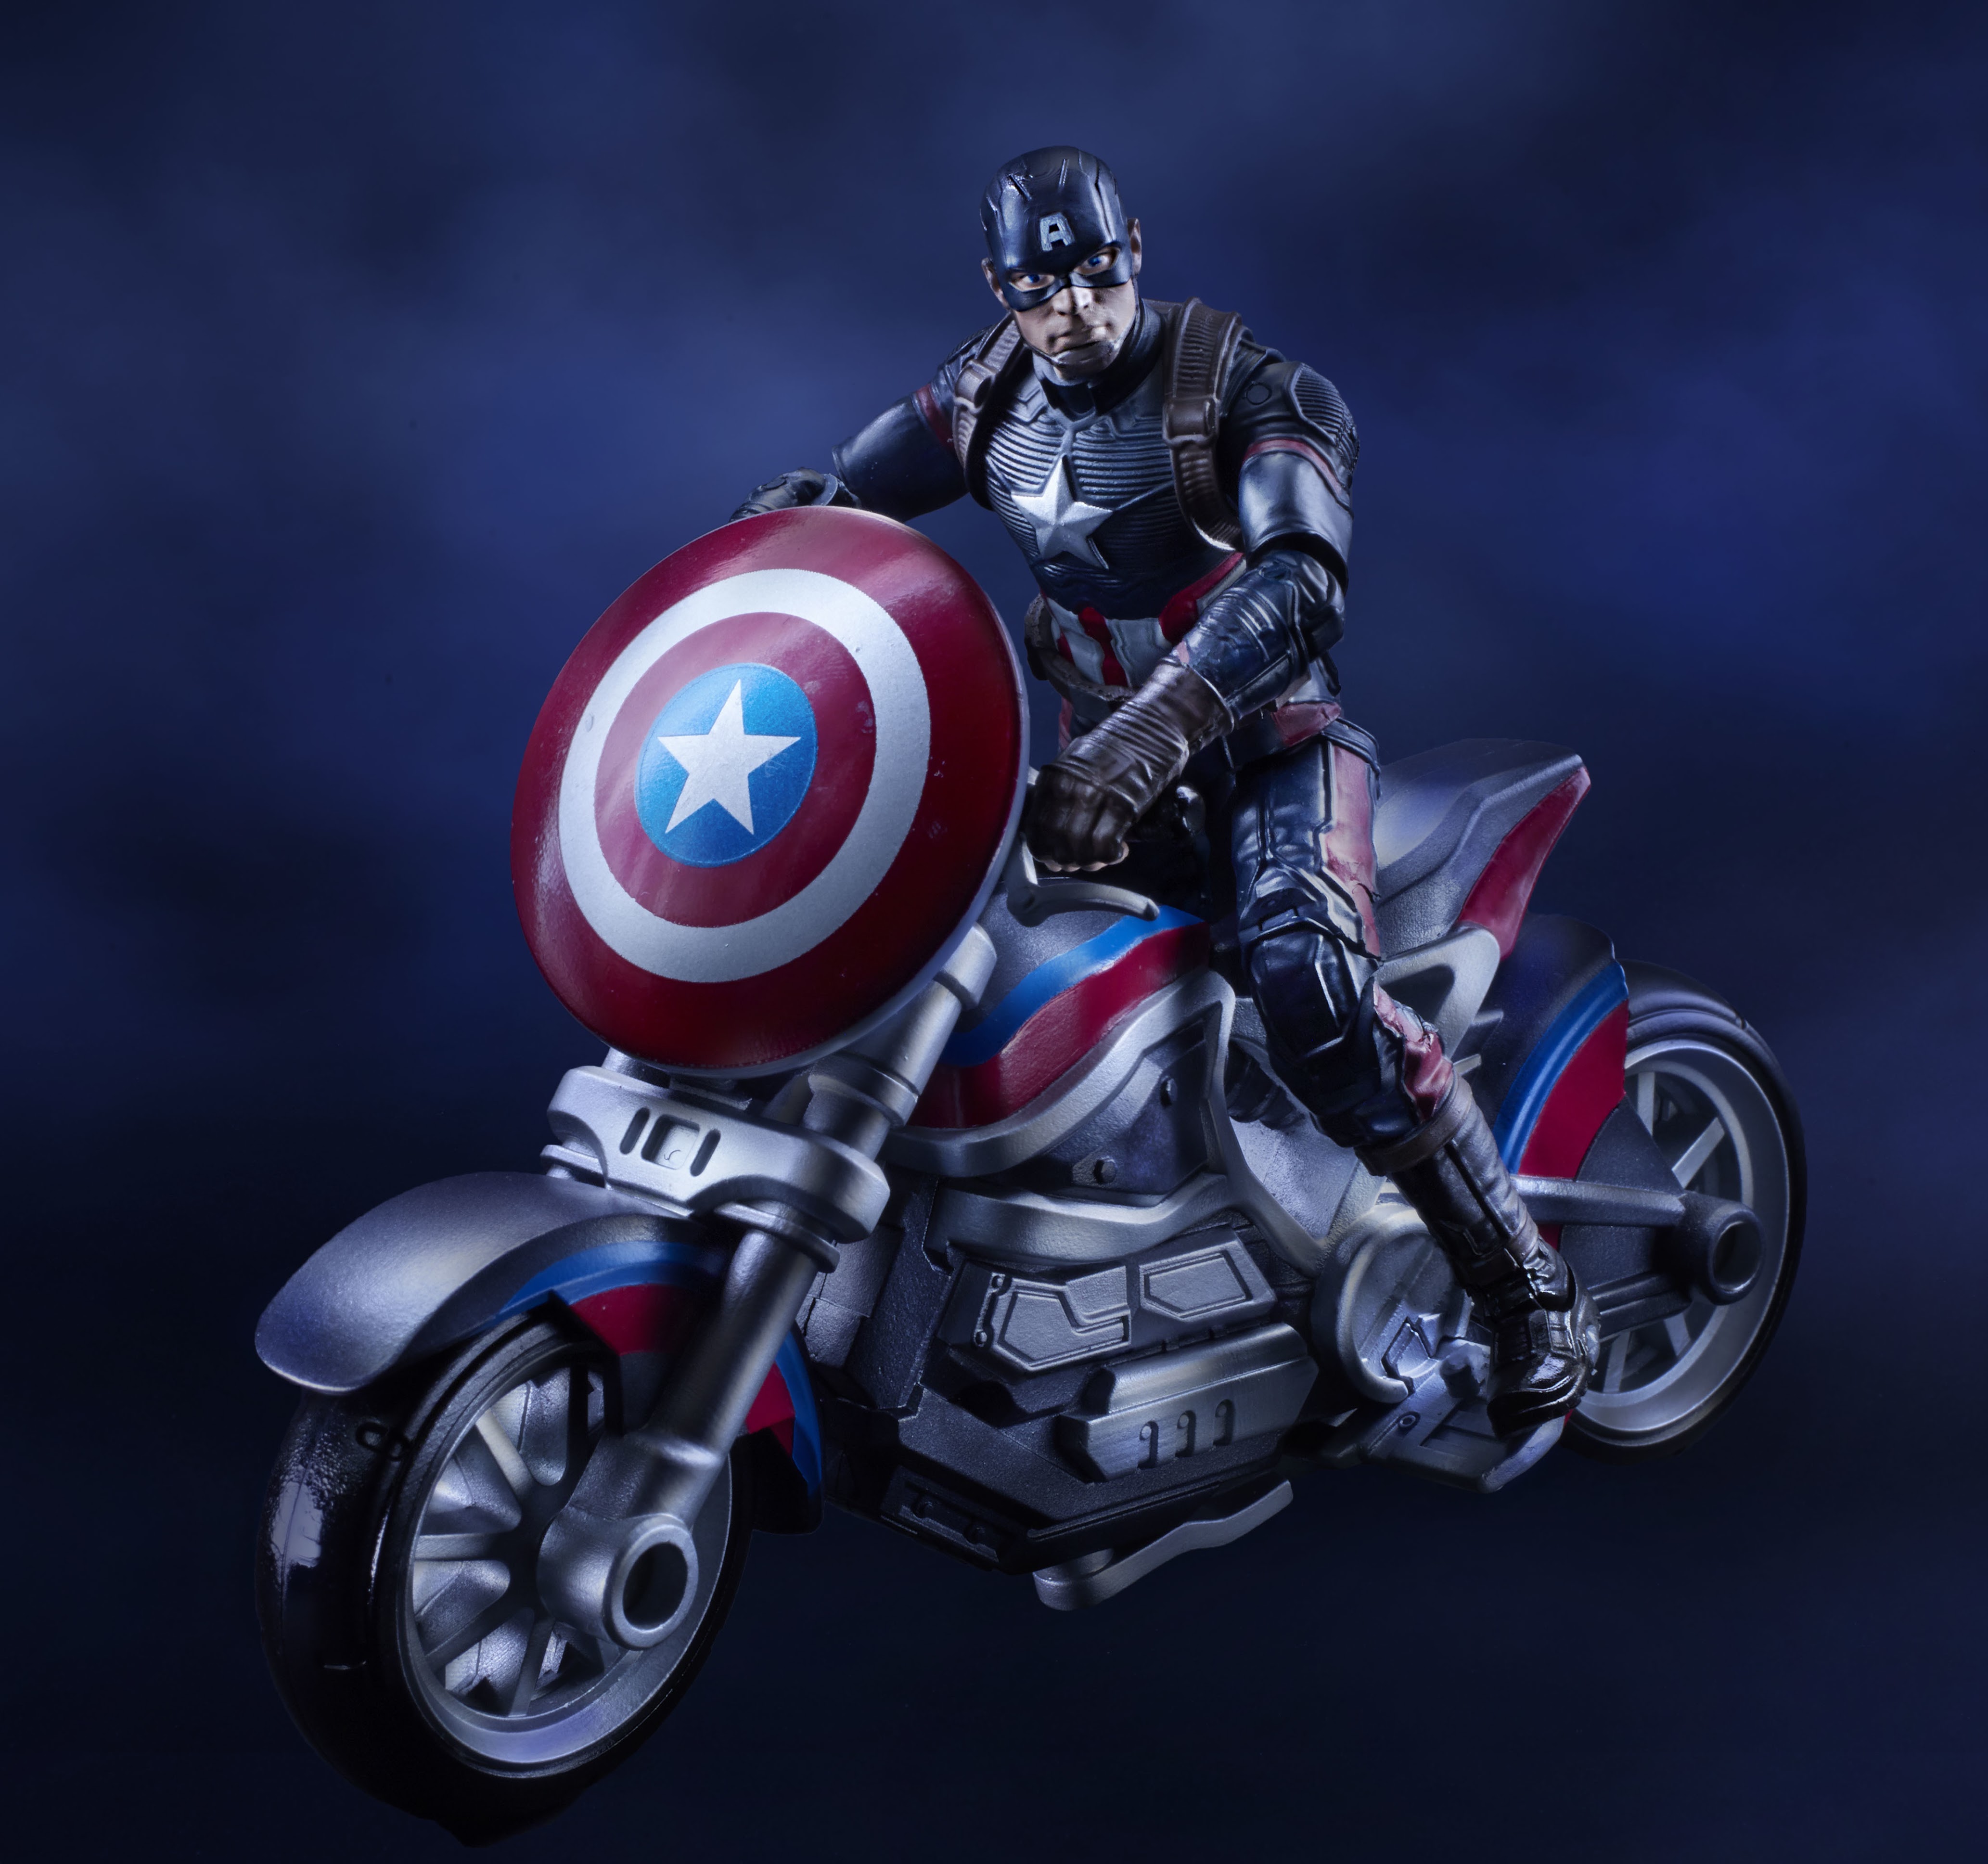 CivilWar3.75CaptainAmericawithmotorcycle Large 300DPI Large Batch of Hasbro Marvel & Star Wars Figure Images From Toy Fair